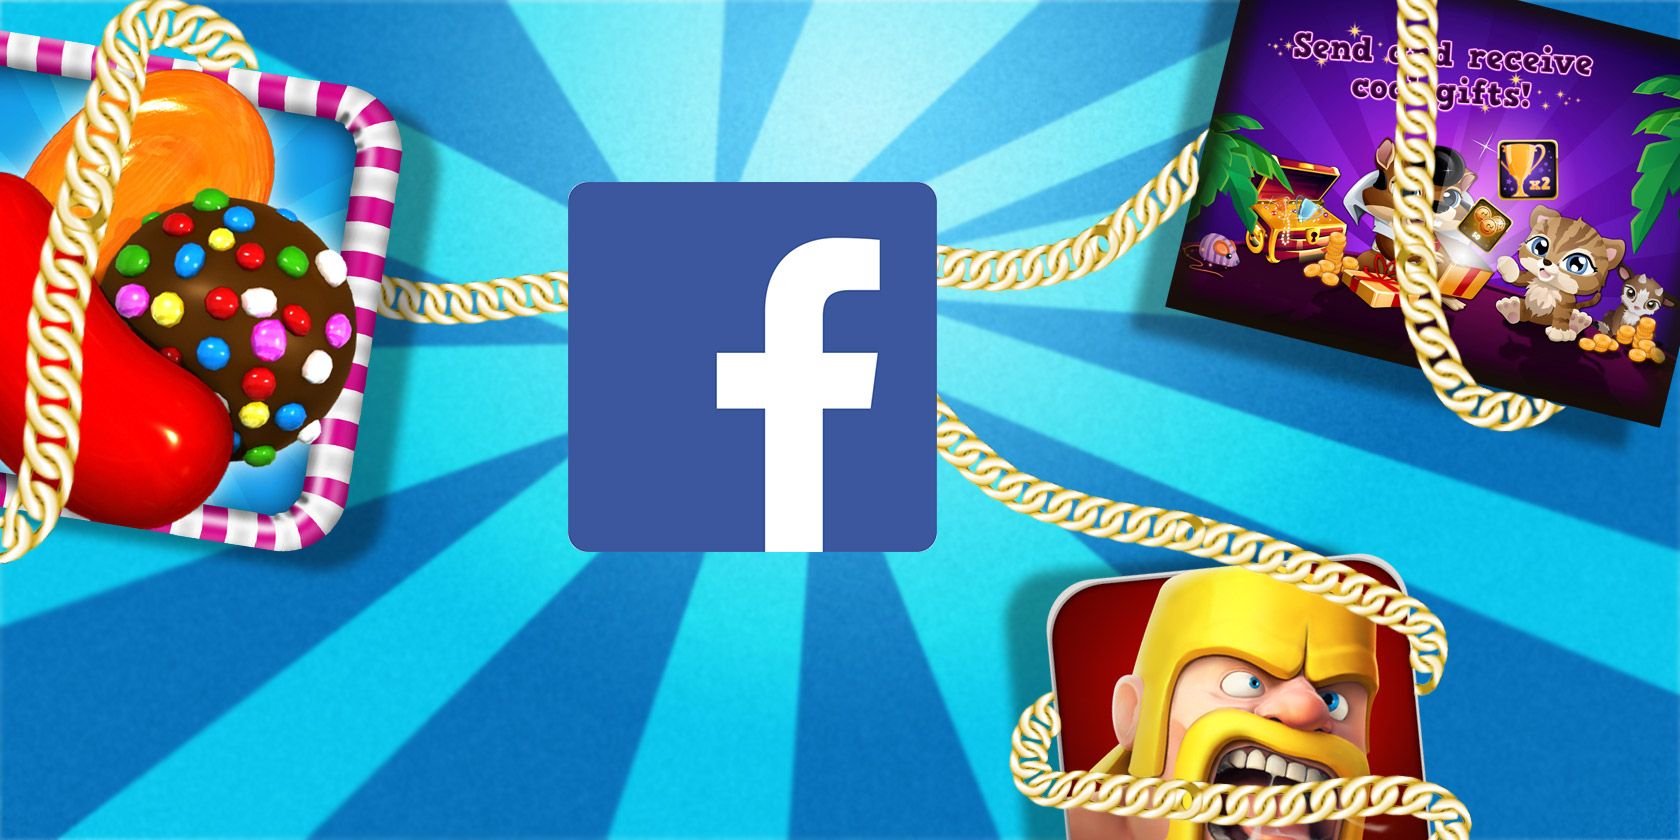 How To Play Games On Facebook Without Anyone Knowing